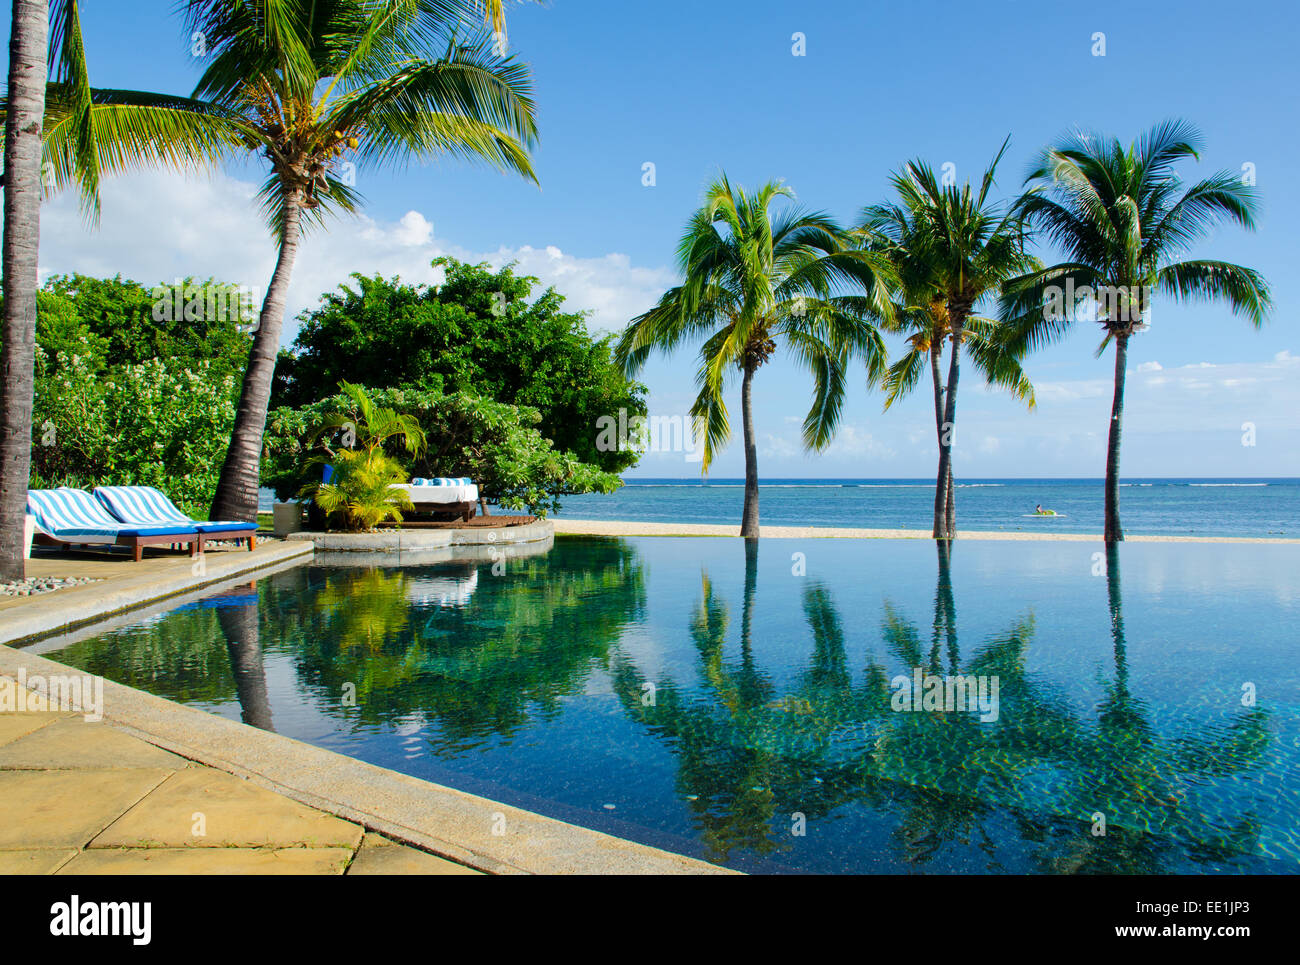 Palm trees reflecting in pool, Mauritius Stock Photo